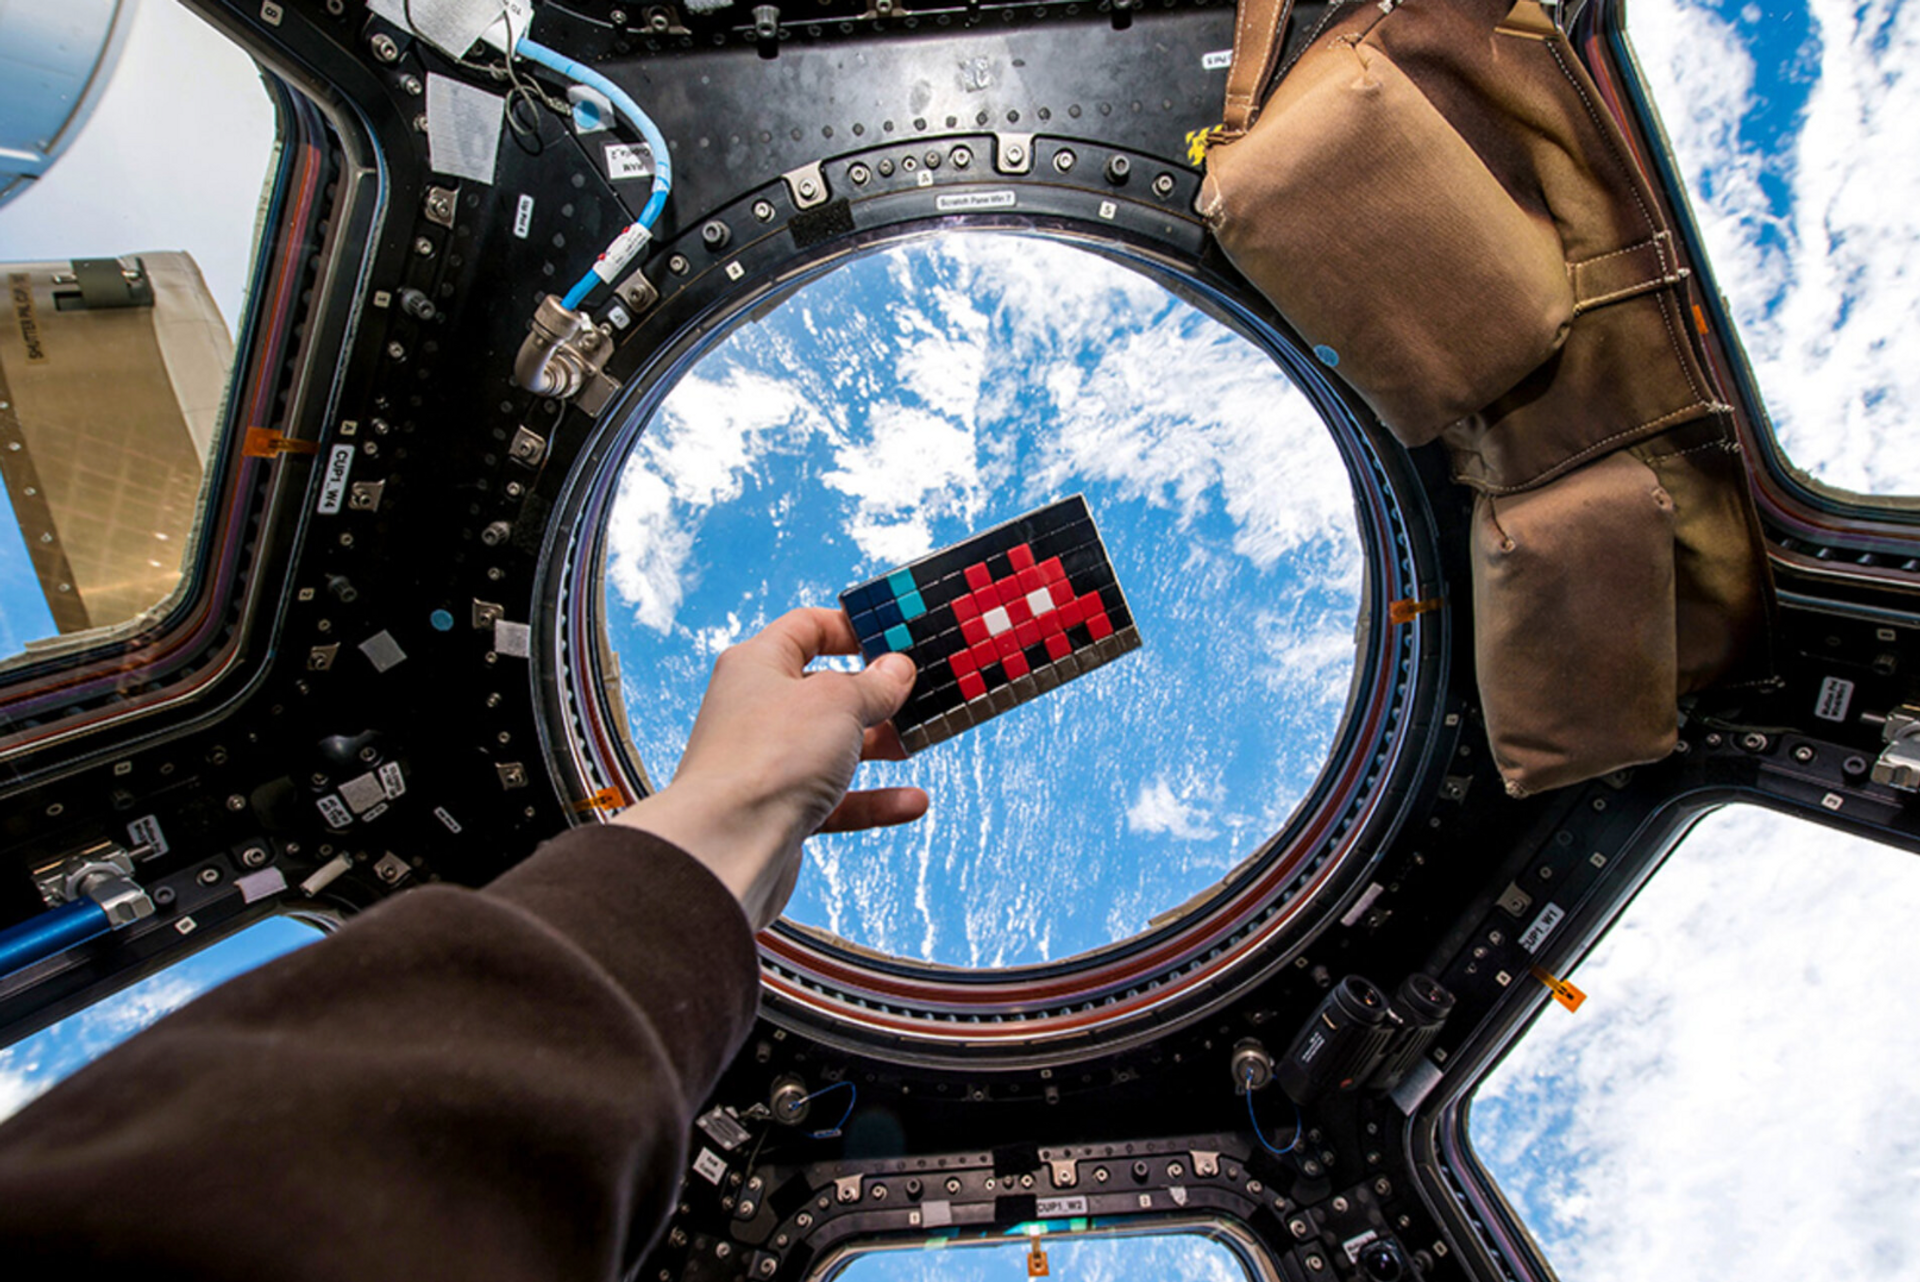 Space 2 by Invader, onboard the International Space Station